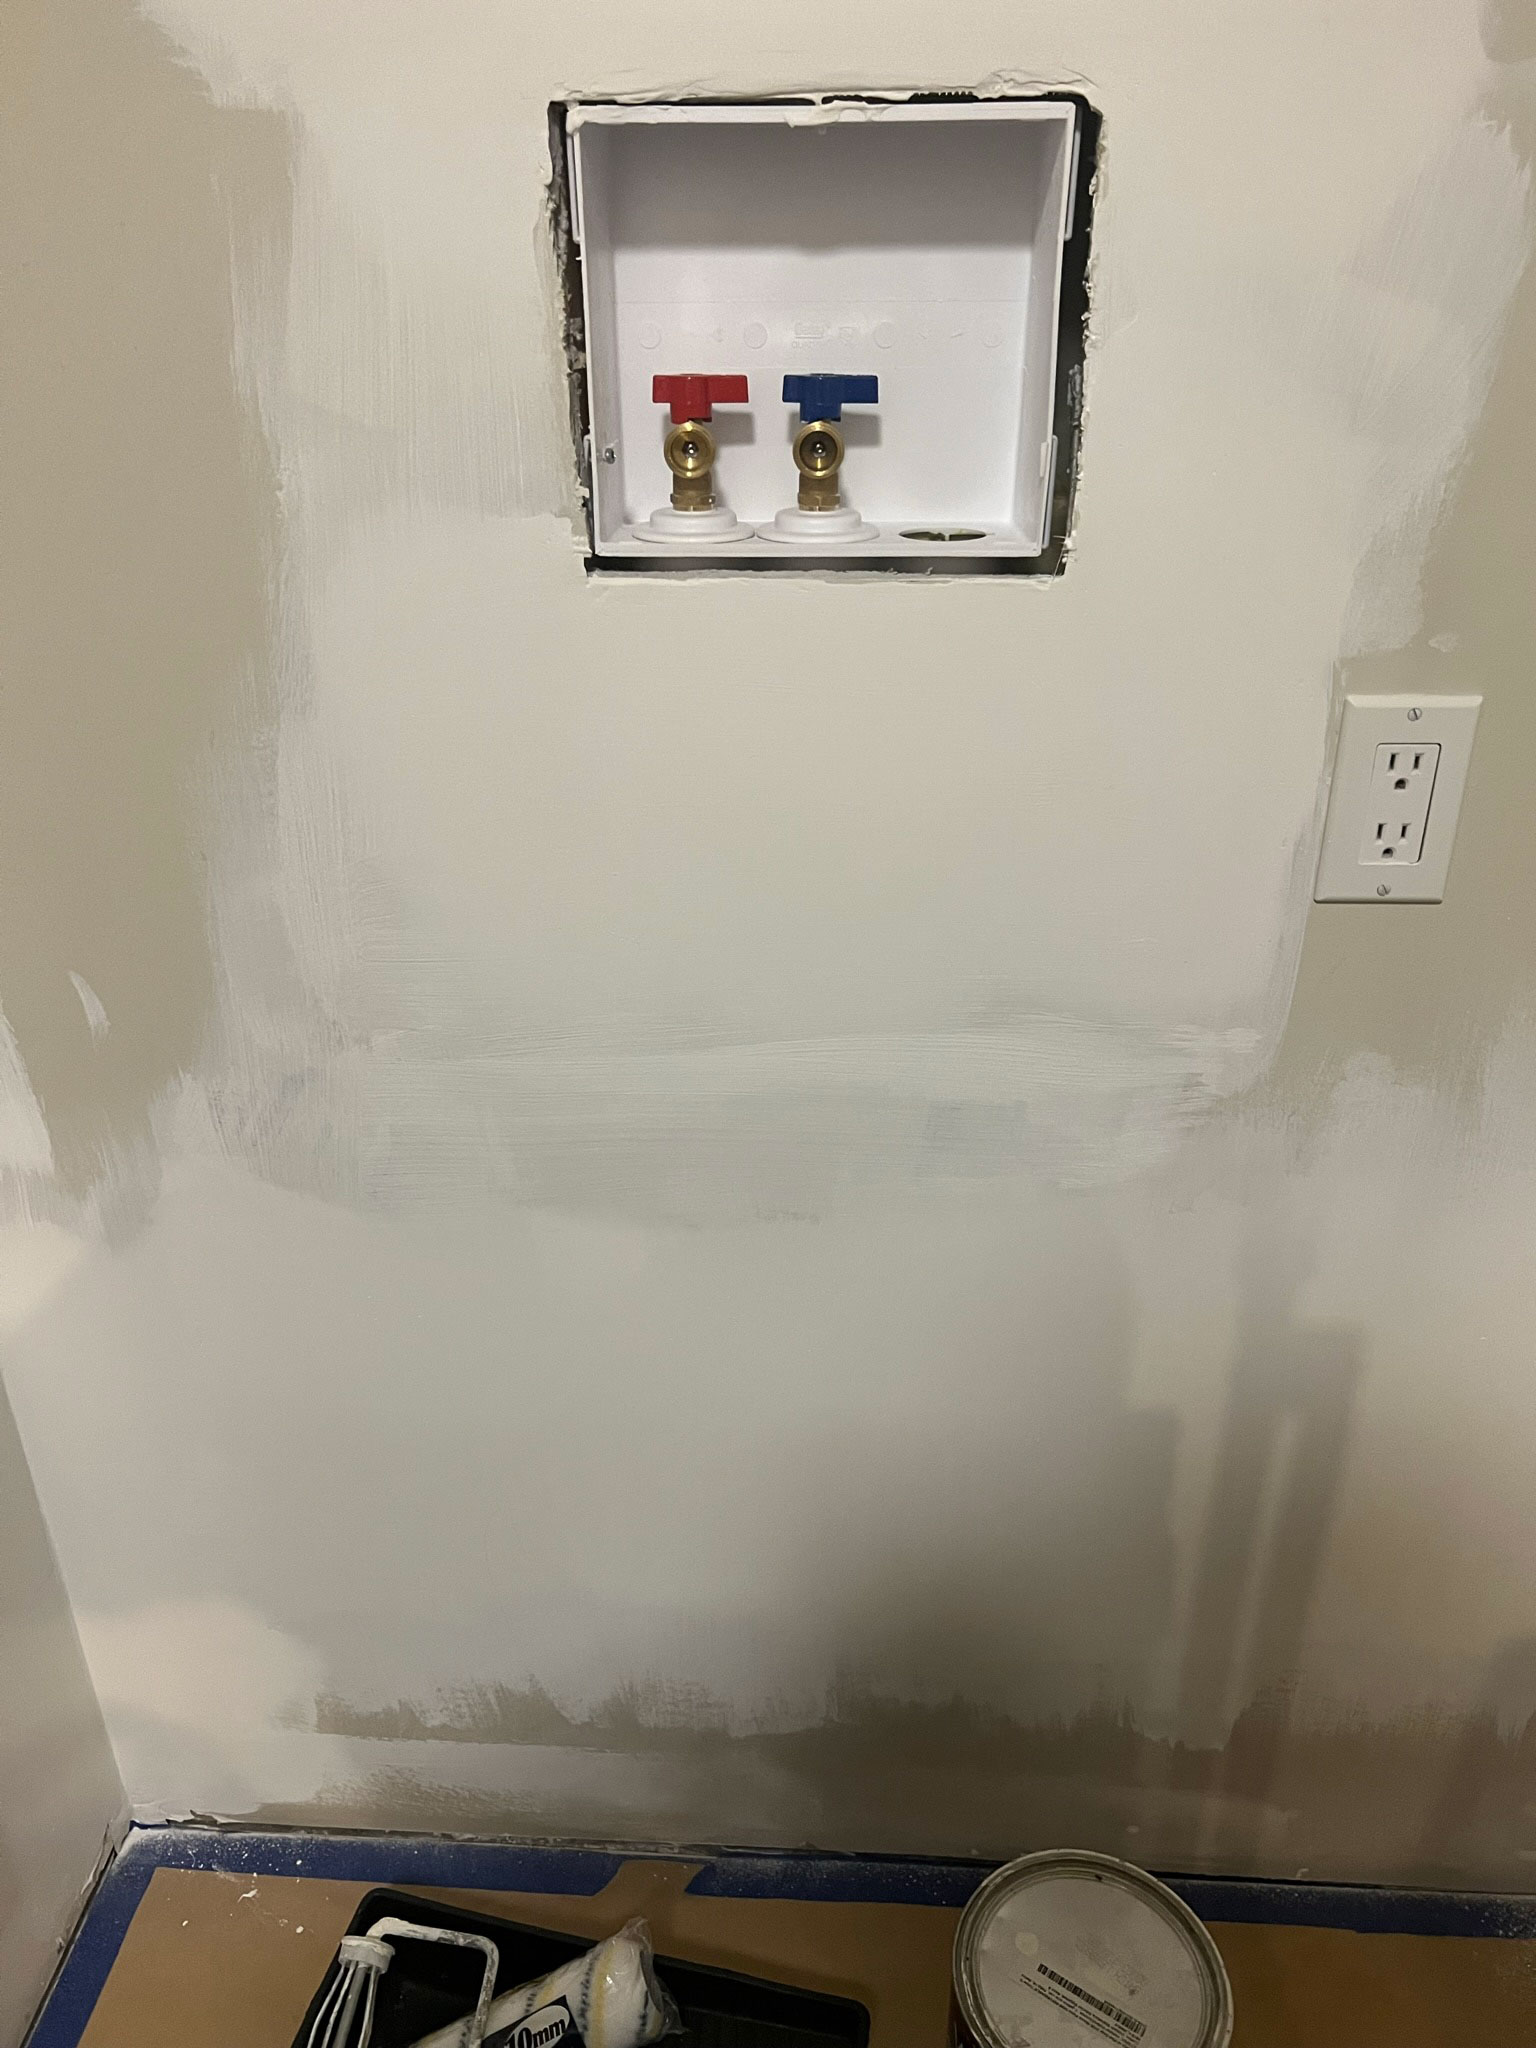 new patches on drywall and new washer and dryer hook up installed.  